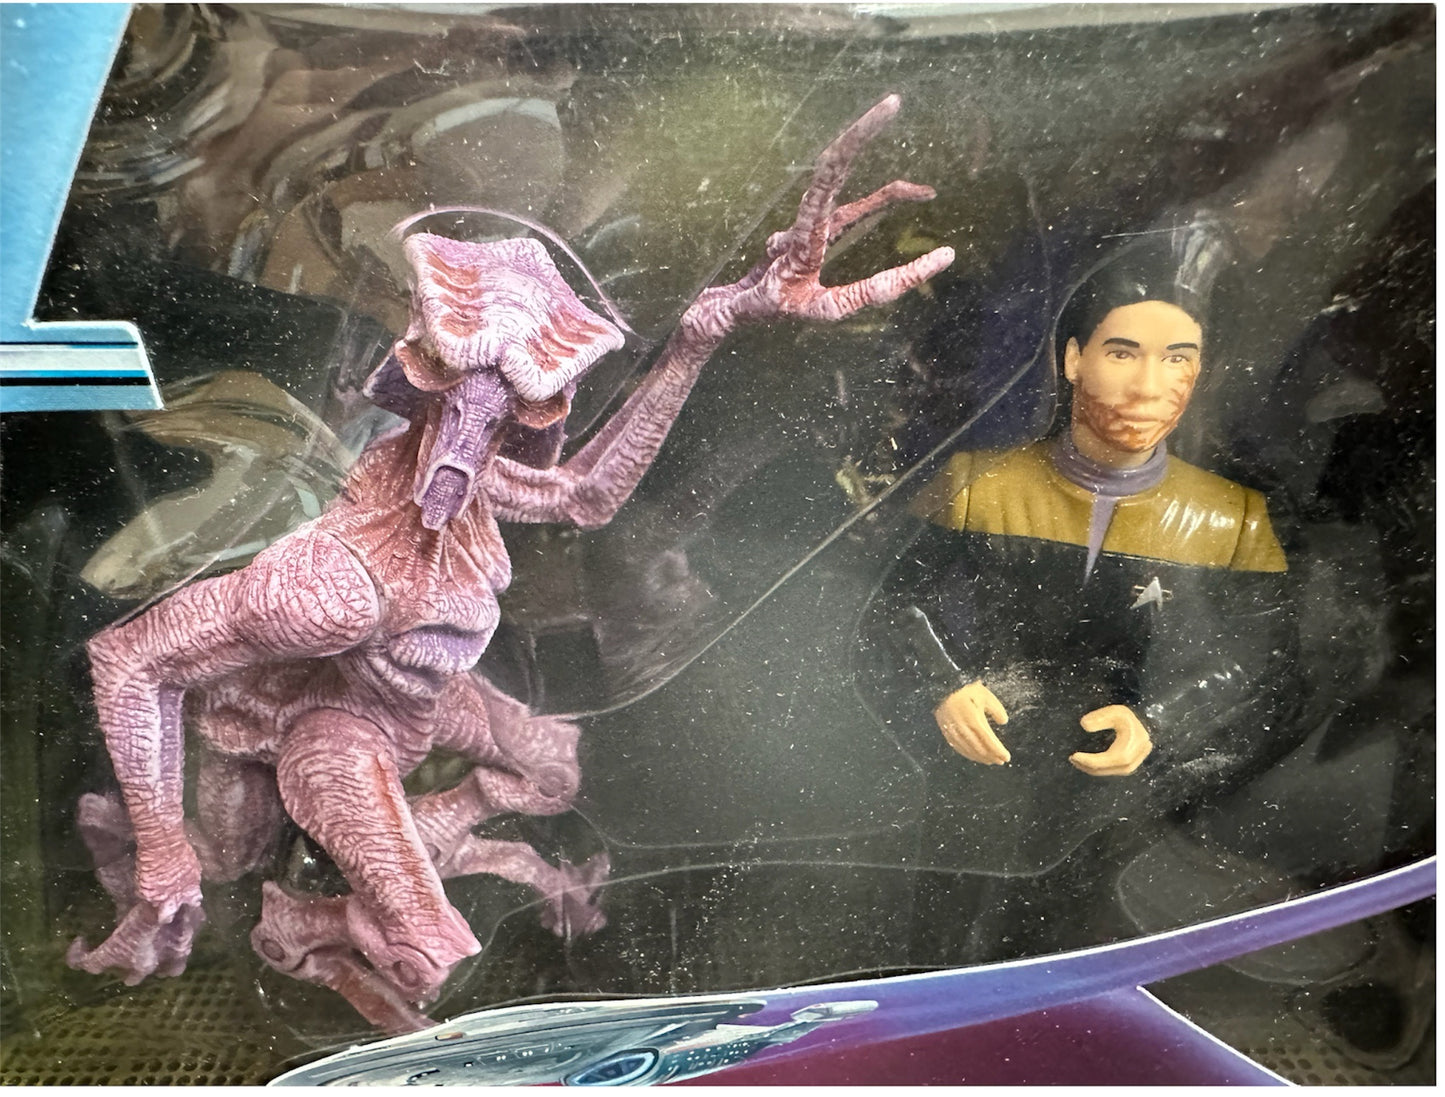 Vintage Playmates 1998 Star Trek Voyager Alien Series Edition Ensign Harry Kim And Species 8472 Action Figures from Star Trek Voyager Episode Scorpian - Brand New Factory Sealed Shop Stock Room Find